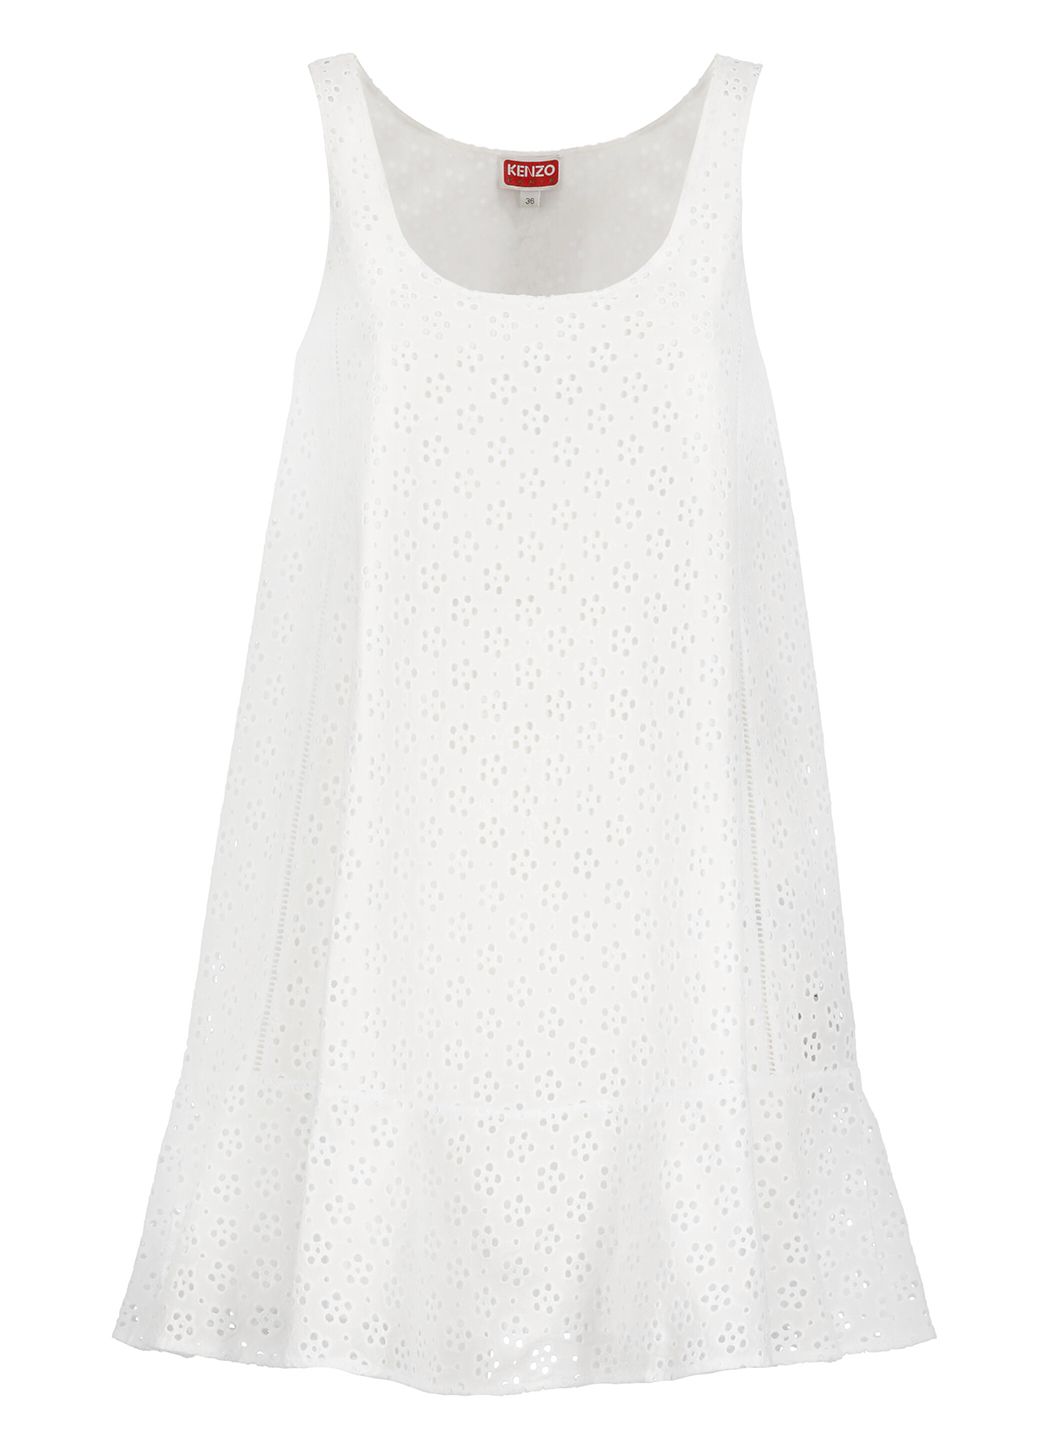 Broderie Anglaise dress